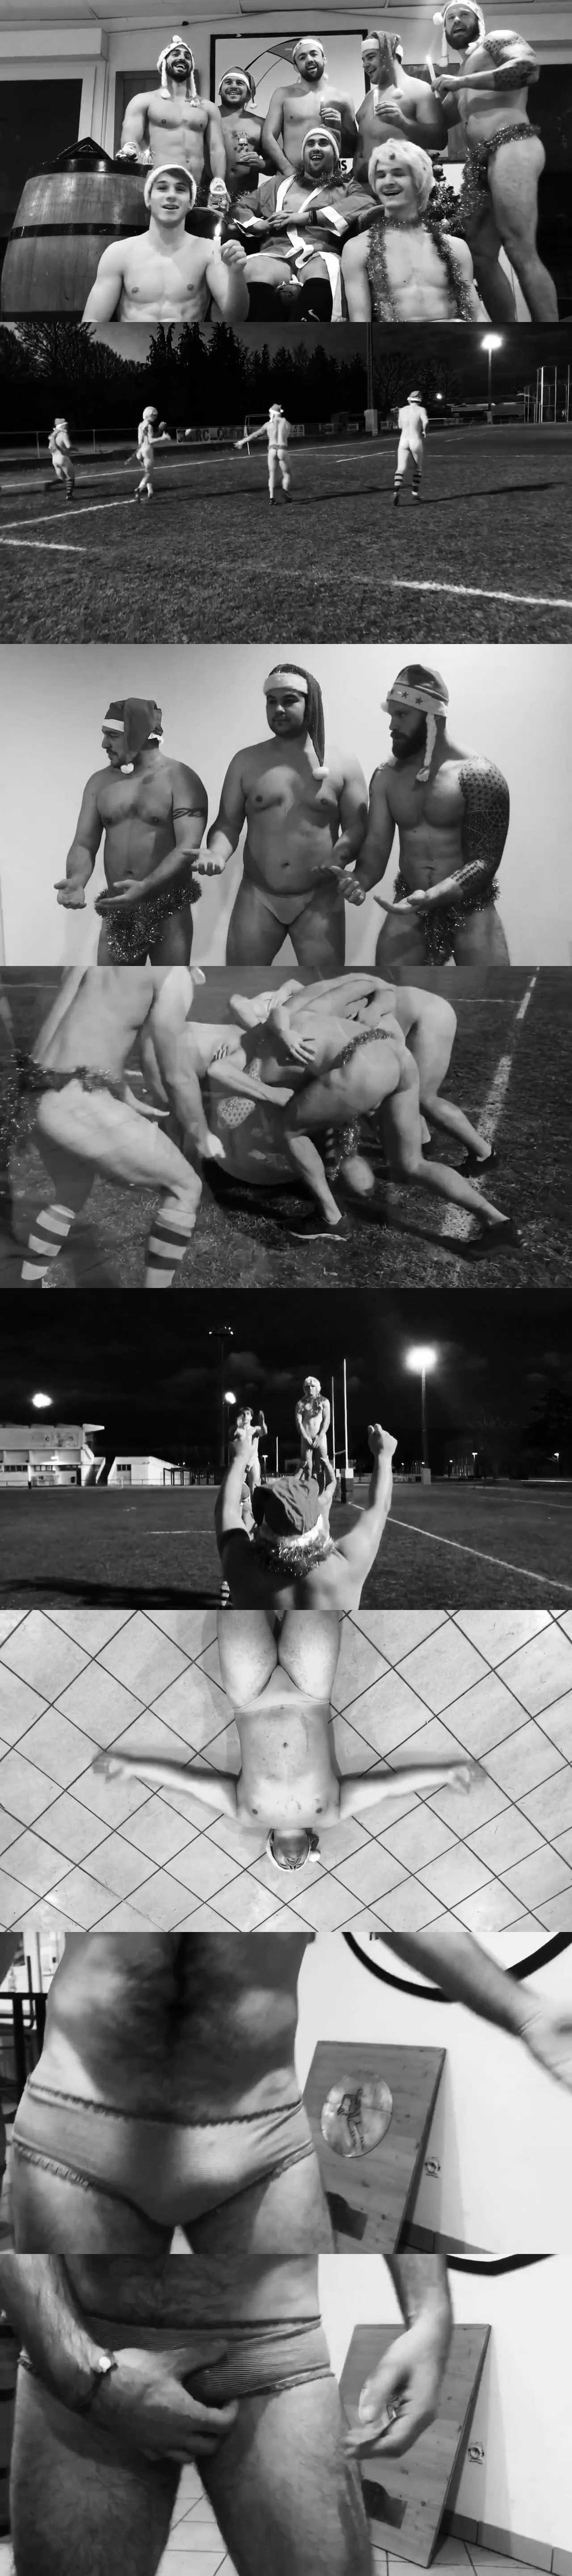 French rugby team naked for christmas video